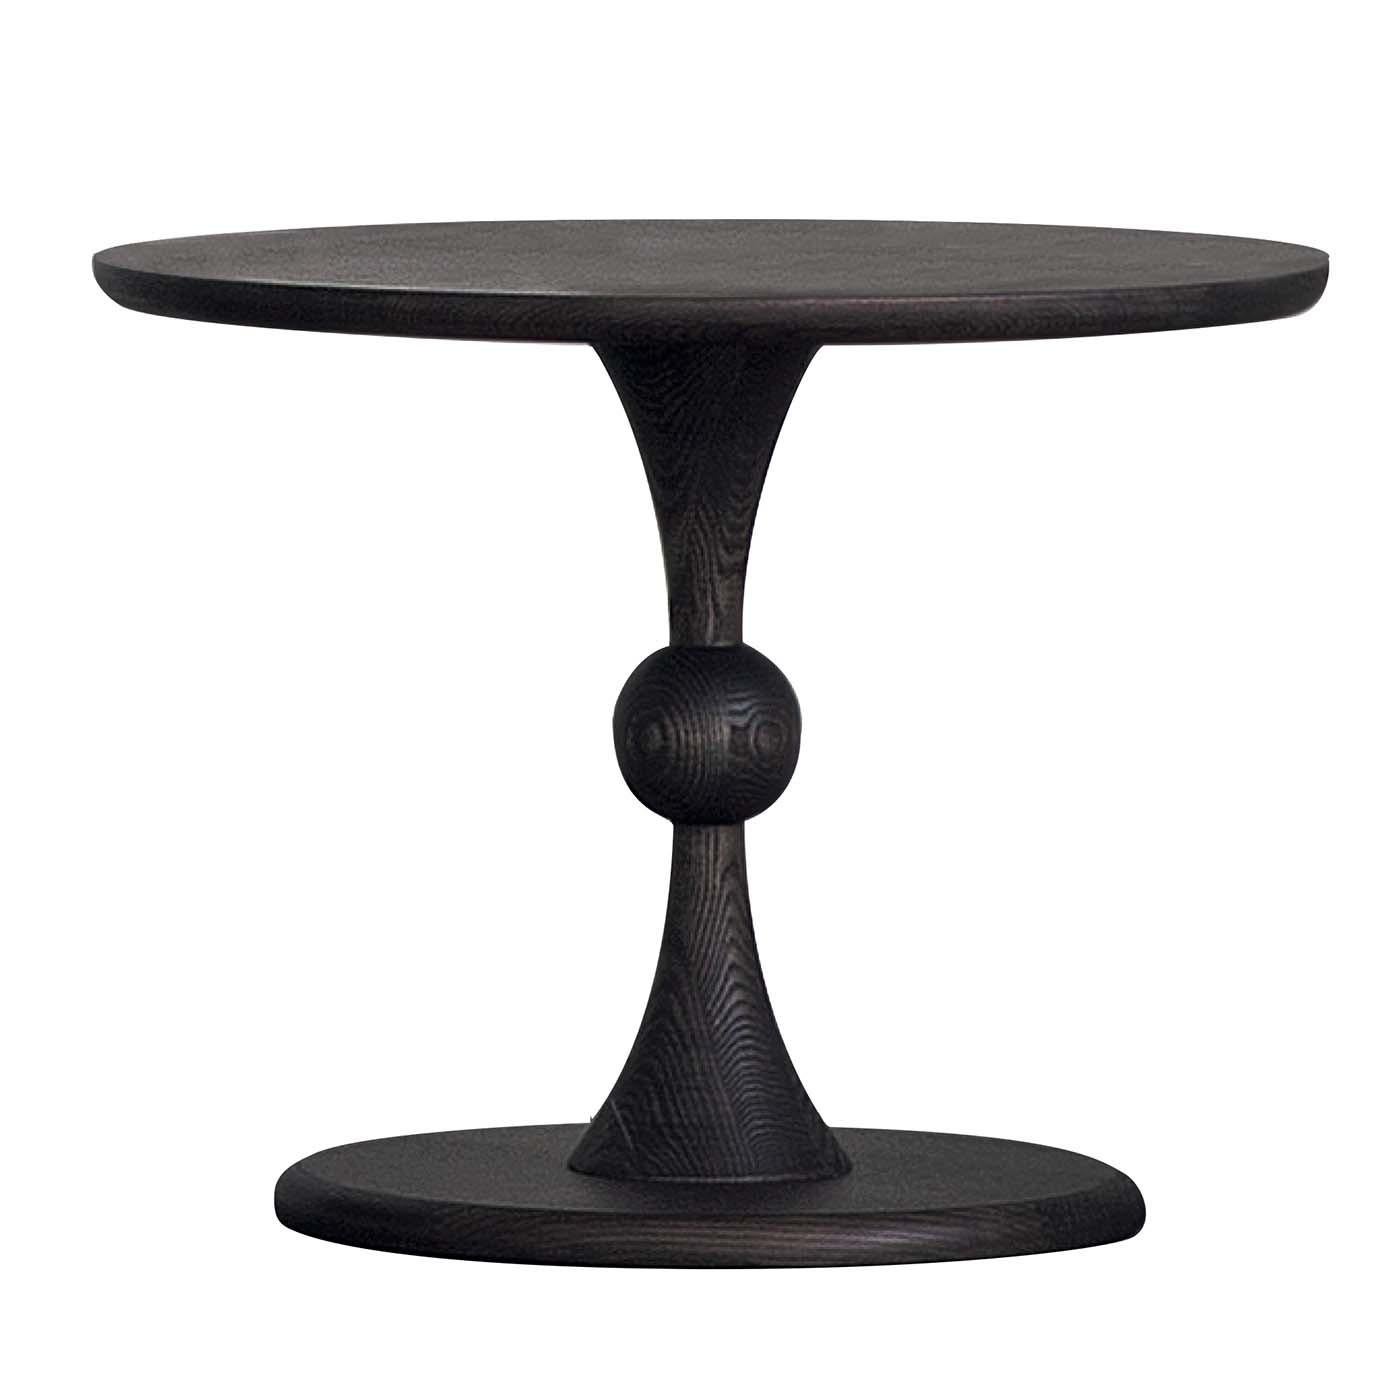 This charming side table is called after the word for hourglass in Italian, for the shape of single leg of the piece. Comprising also a tall side table and a coffee table, this collection boasts subtle elegance and can be a versatile choice for both